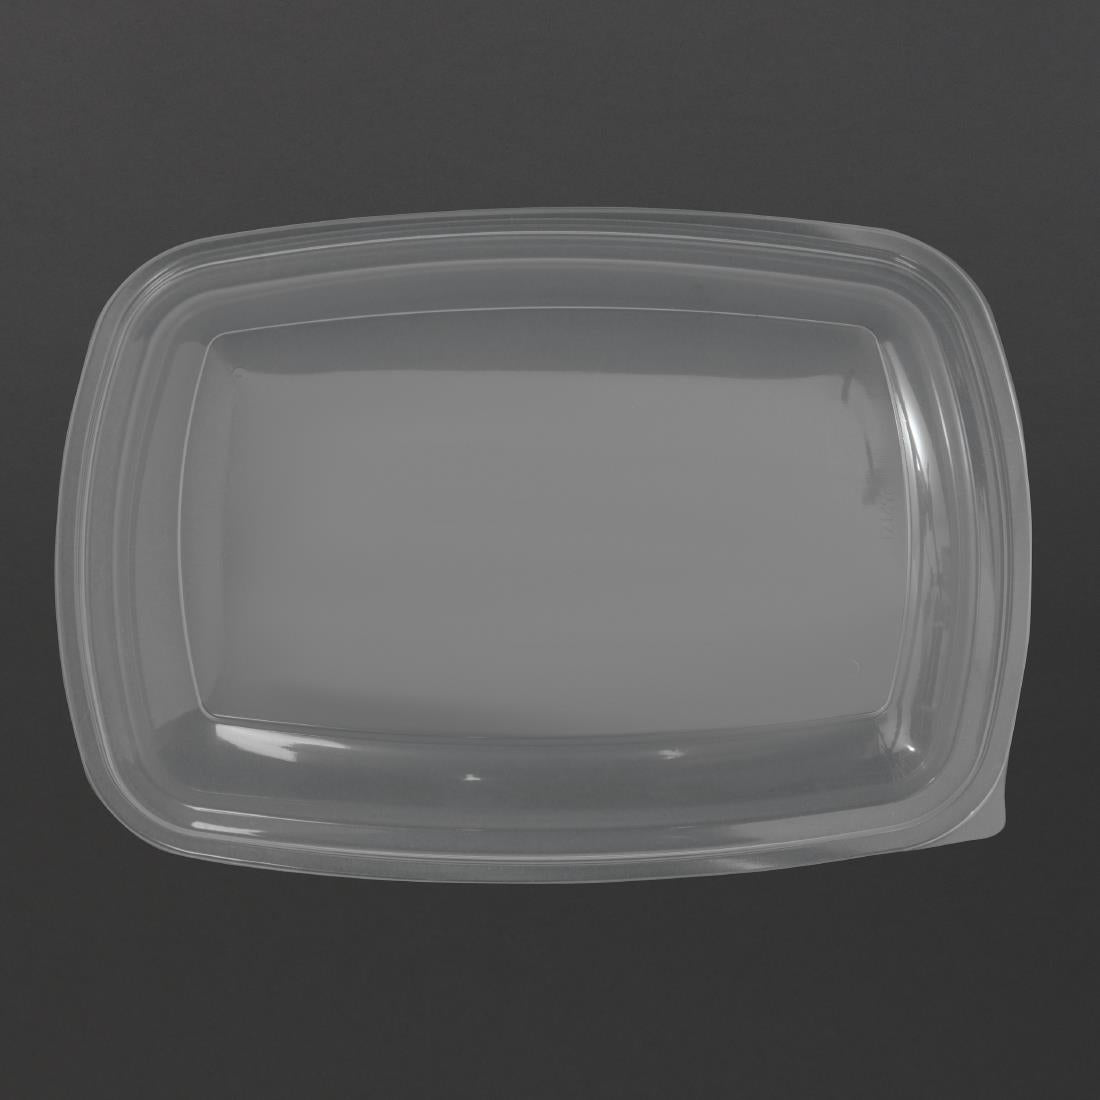 Fastpac Large Rectangular Food Container Lids 1350ml / 48oz (Pack of 150) JD Catering Equipment Solutions Ltd